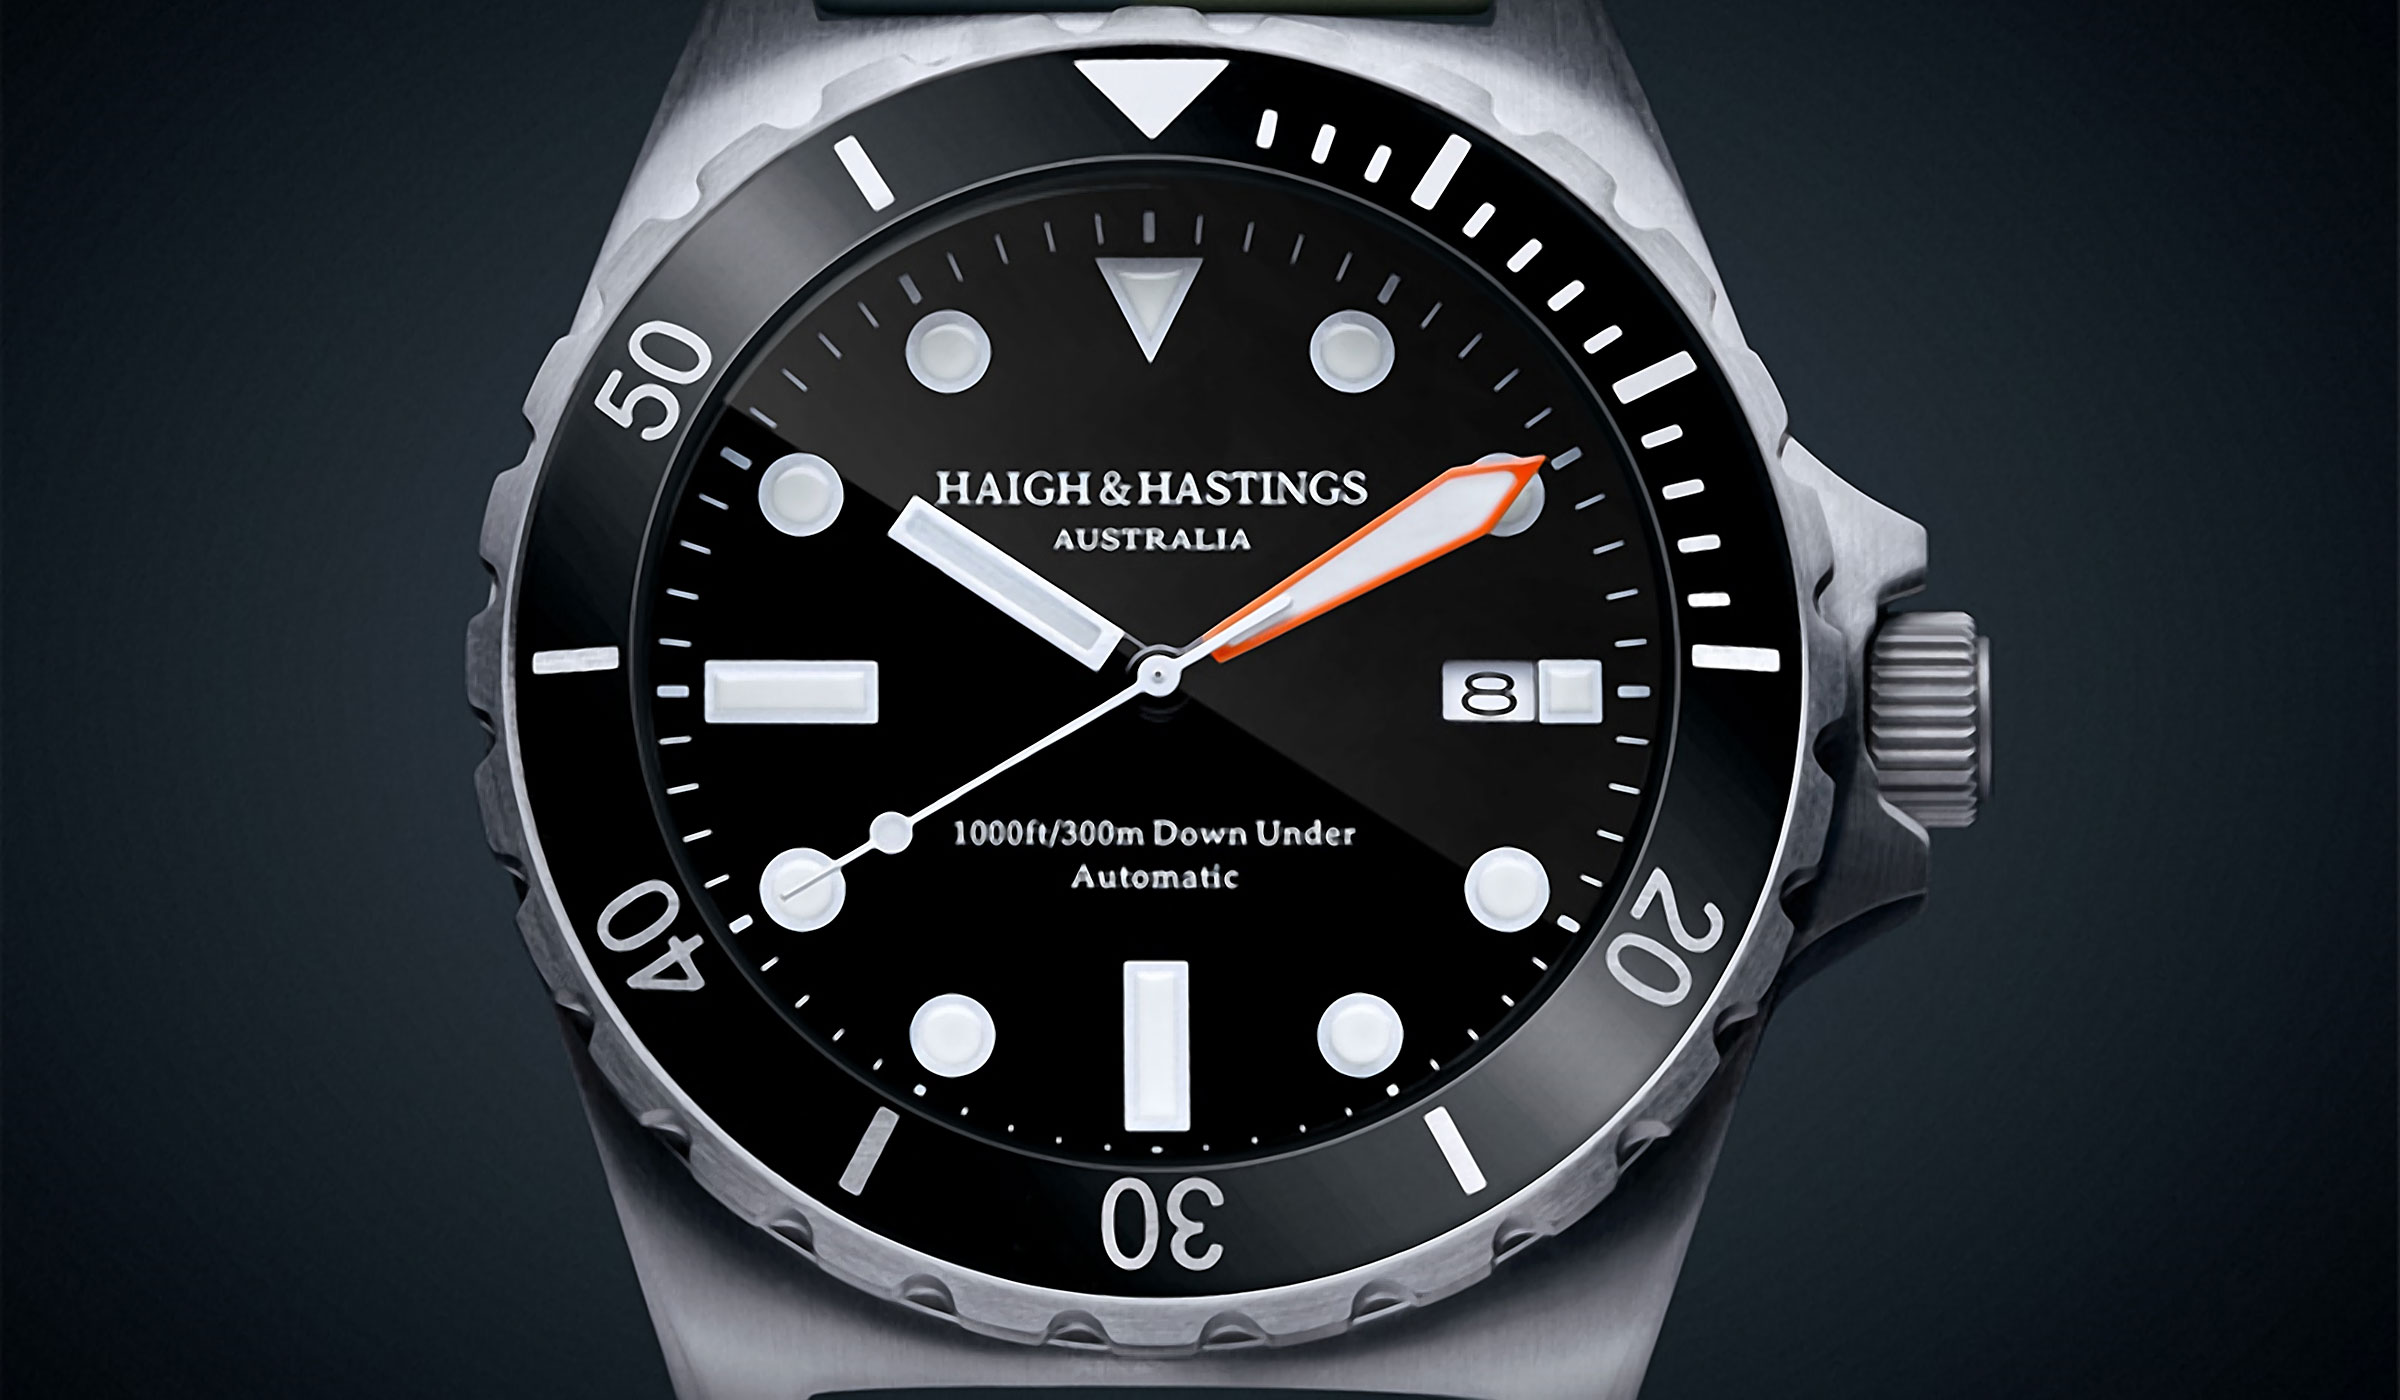 M2 DIVER BY HAIGH & HASTINGS